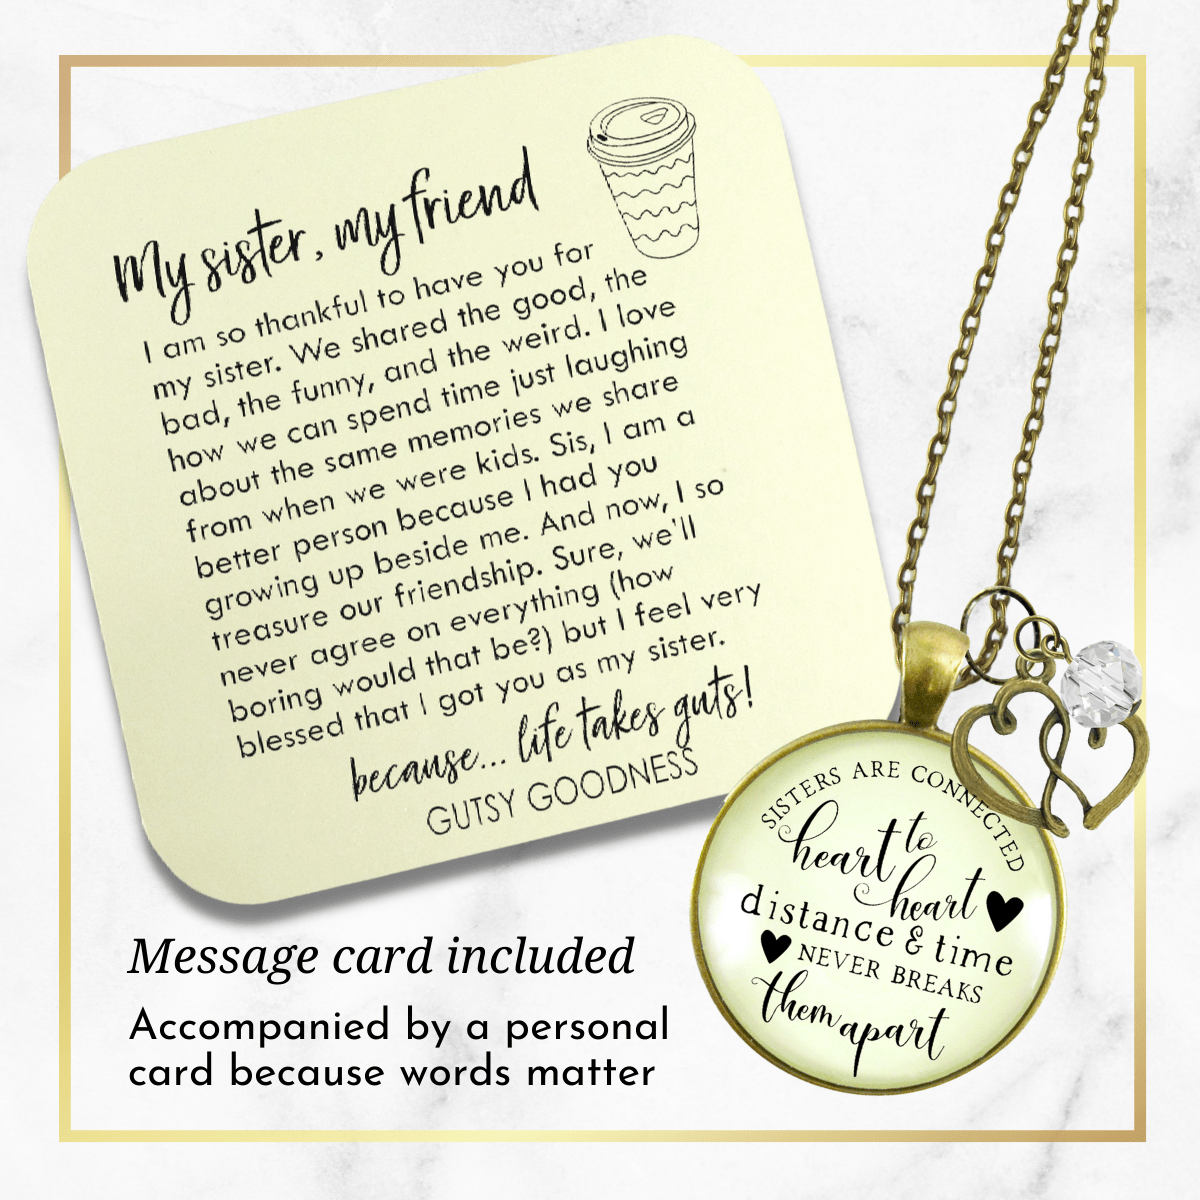 Gutsy Goodness Sisters are Connected Necklace Long Distance Friendship Jewelry Open Heart Charm - Gutsy Goodness Handmade Jewelry;Sisters Are Connected Necklace Long Distance Friendship Jewelry Open Heart Charm - Gutsy Goodness Handmade Jewelry Gifts